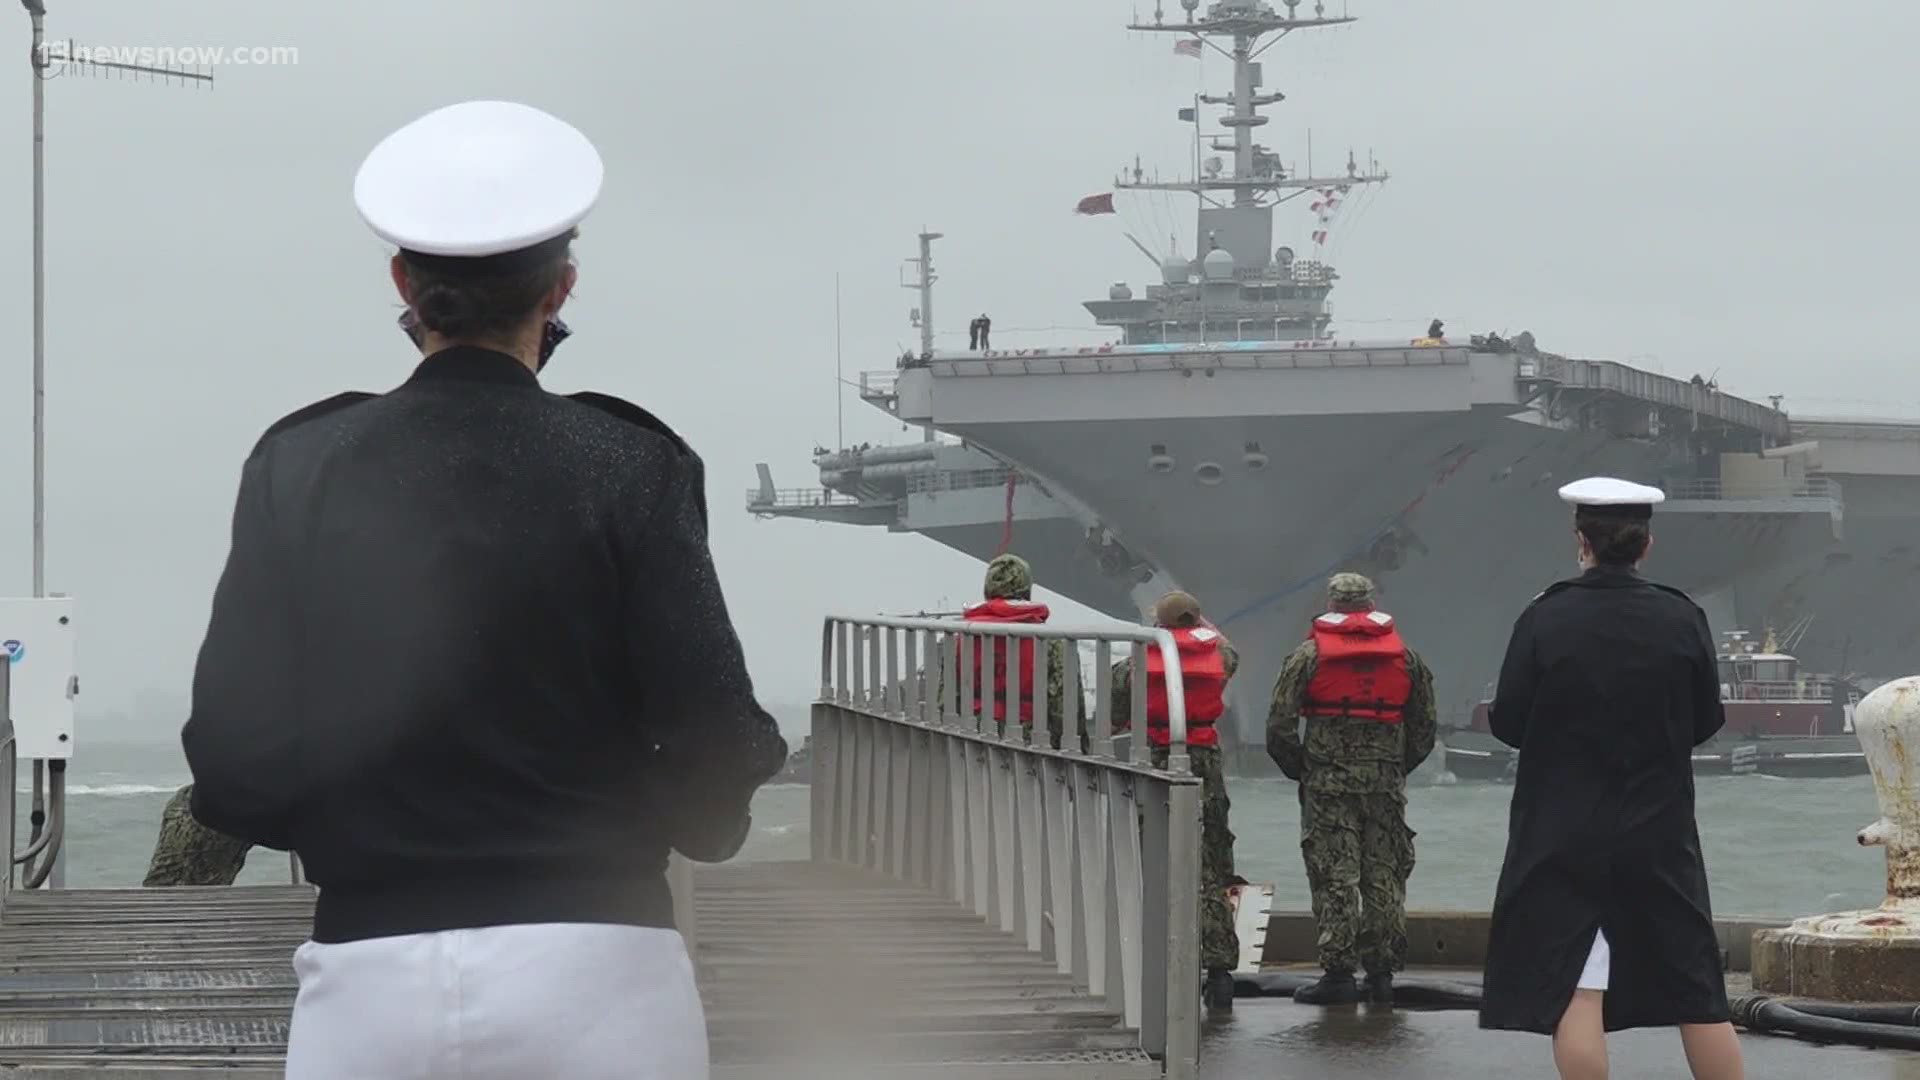 USS Harry S. Truman pulled into Naval Station Norfolk on Tuesday, the last ship of the Truman Carrier Strike Group to return after spending nearly 7 months at sea.